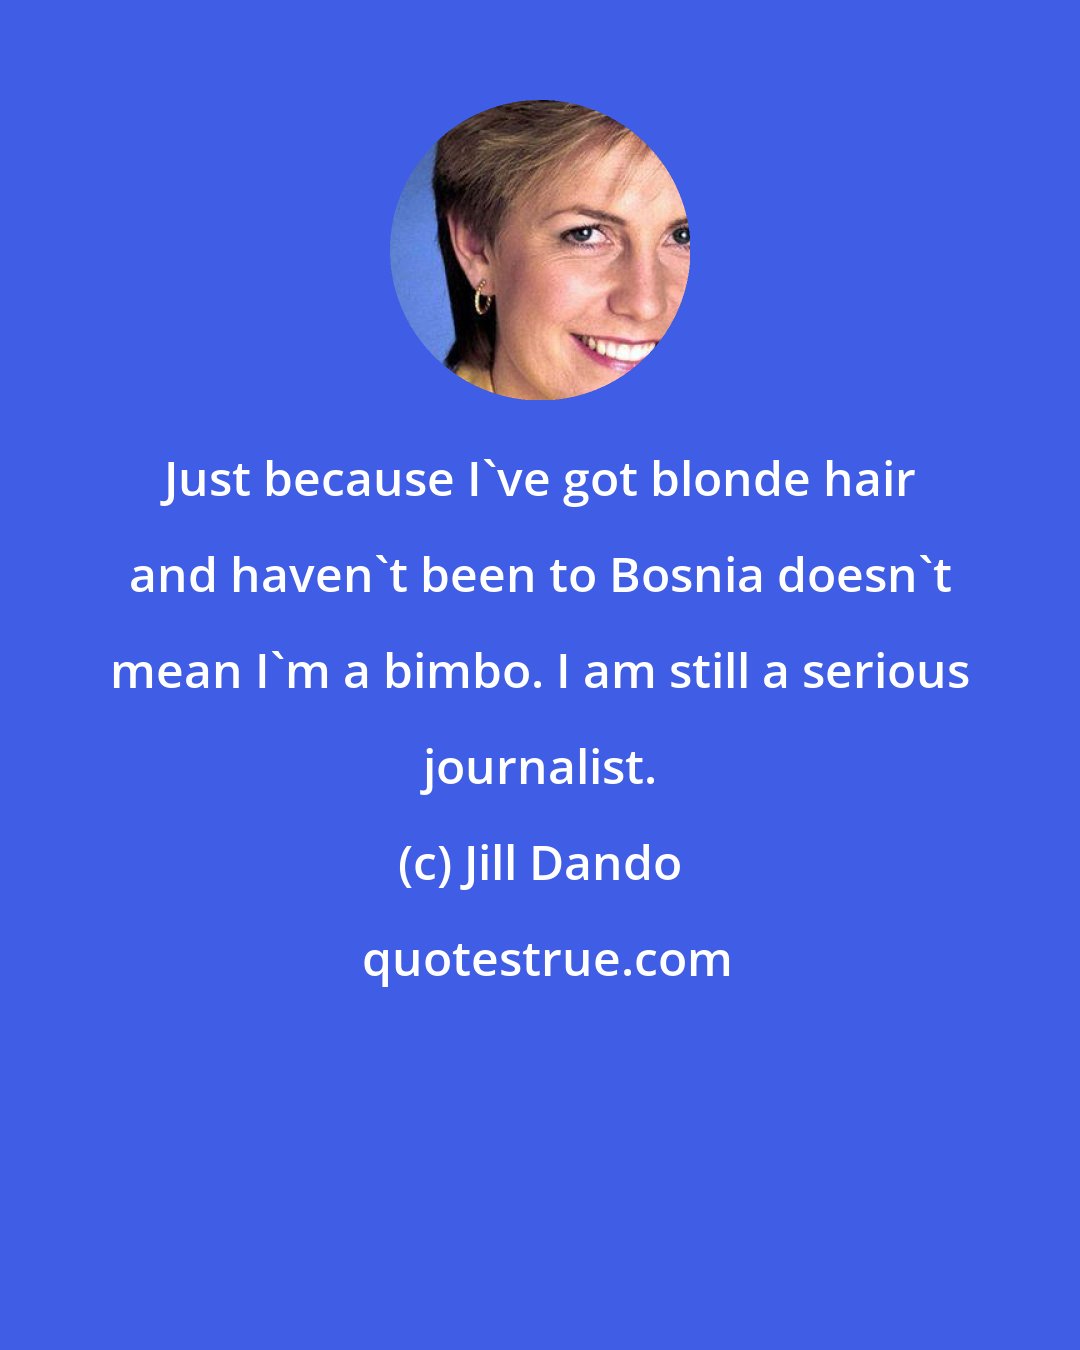 Jill Dando: Just because I've got blonde hair and haven't been to Bosnia doesn't mean I'm a bimbo. I am still a serious journalist.